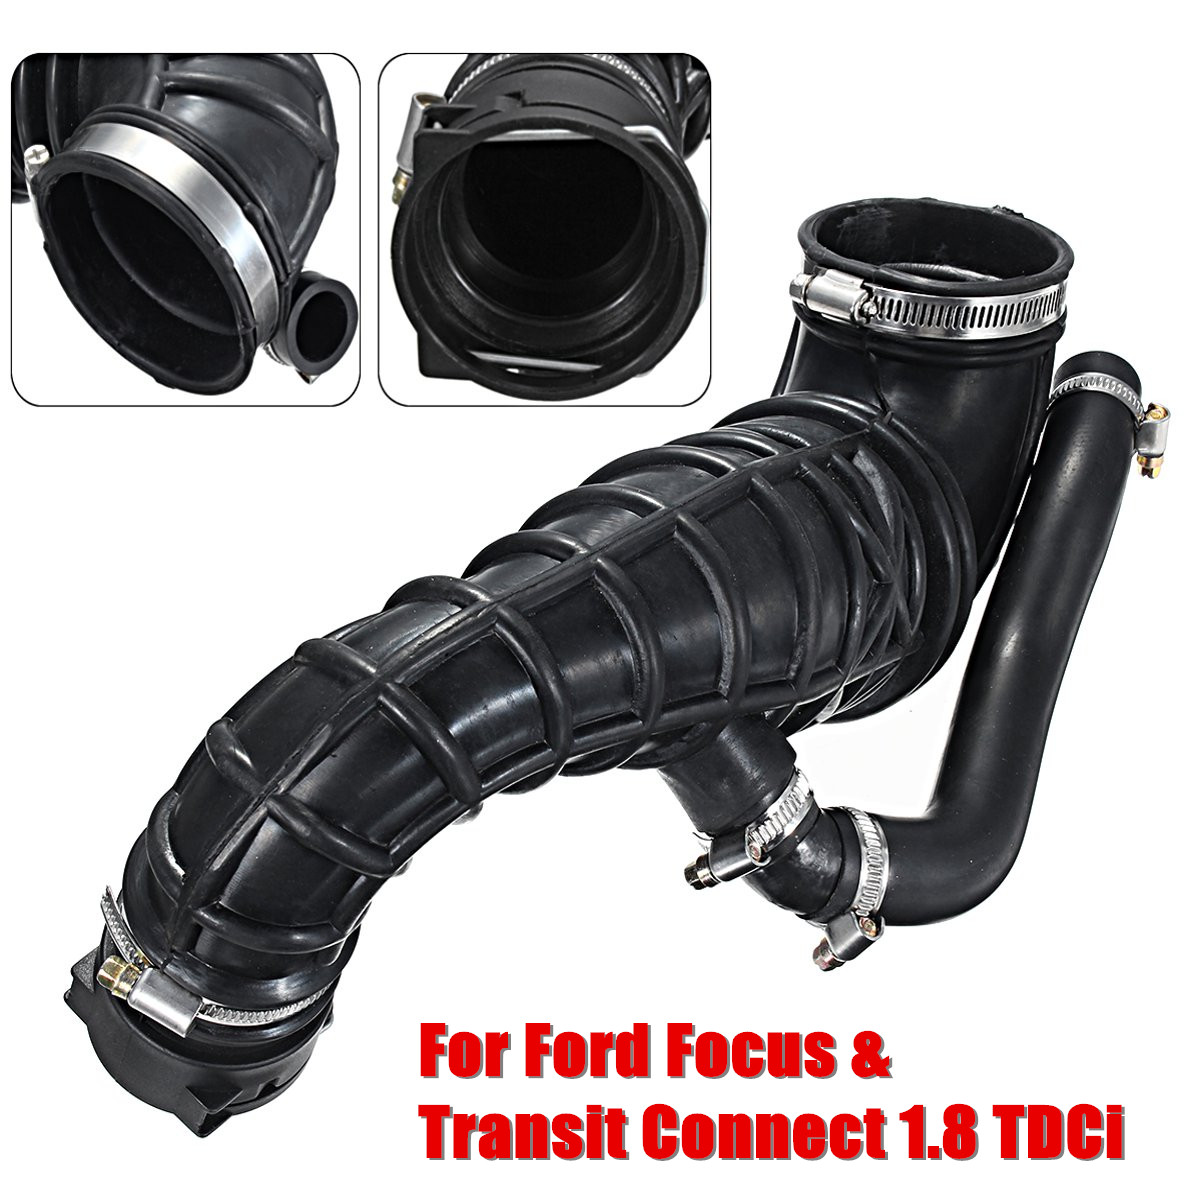 Air-Filter-Car-Intake-Hose-Pipe-For-Ford-Focus-Transit-Connect-18-TDCi-1298788